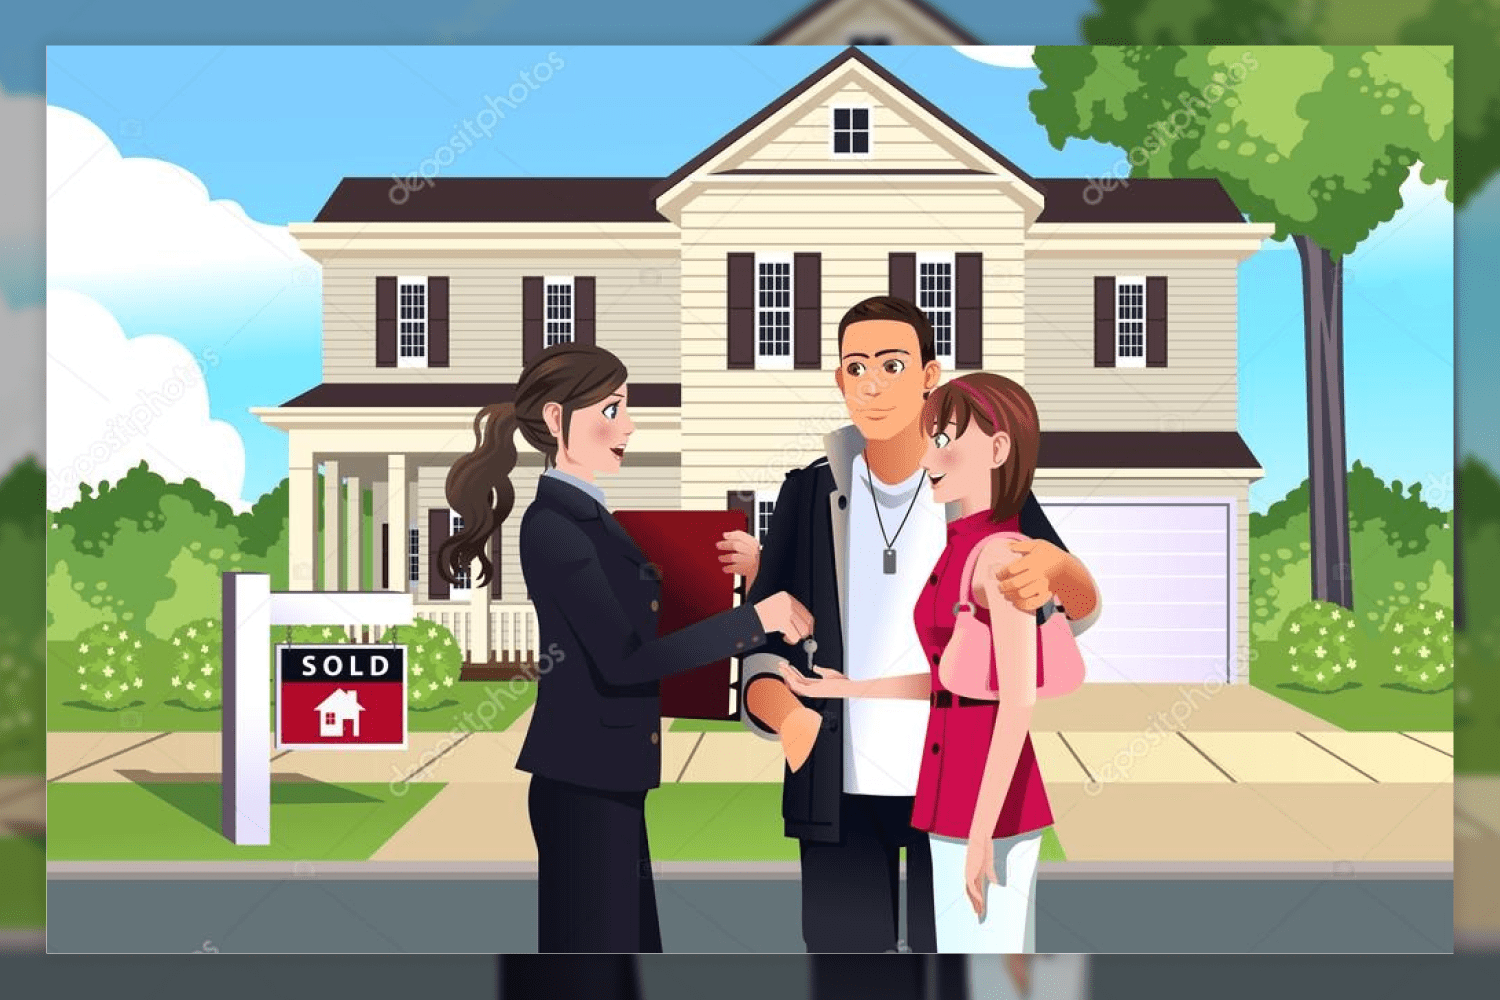 87 real estate agent in front of a sold house with her customer 650